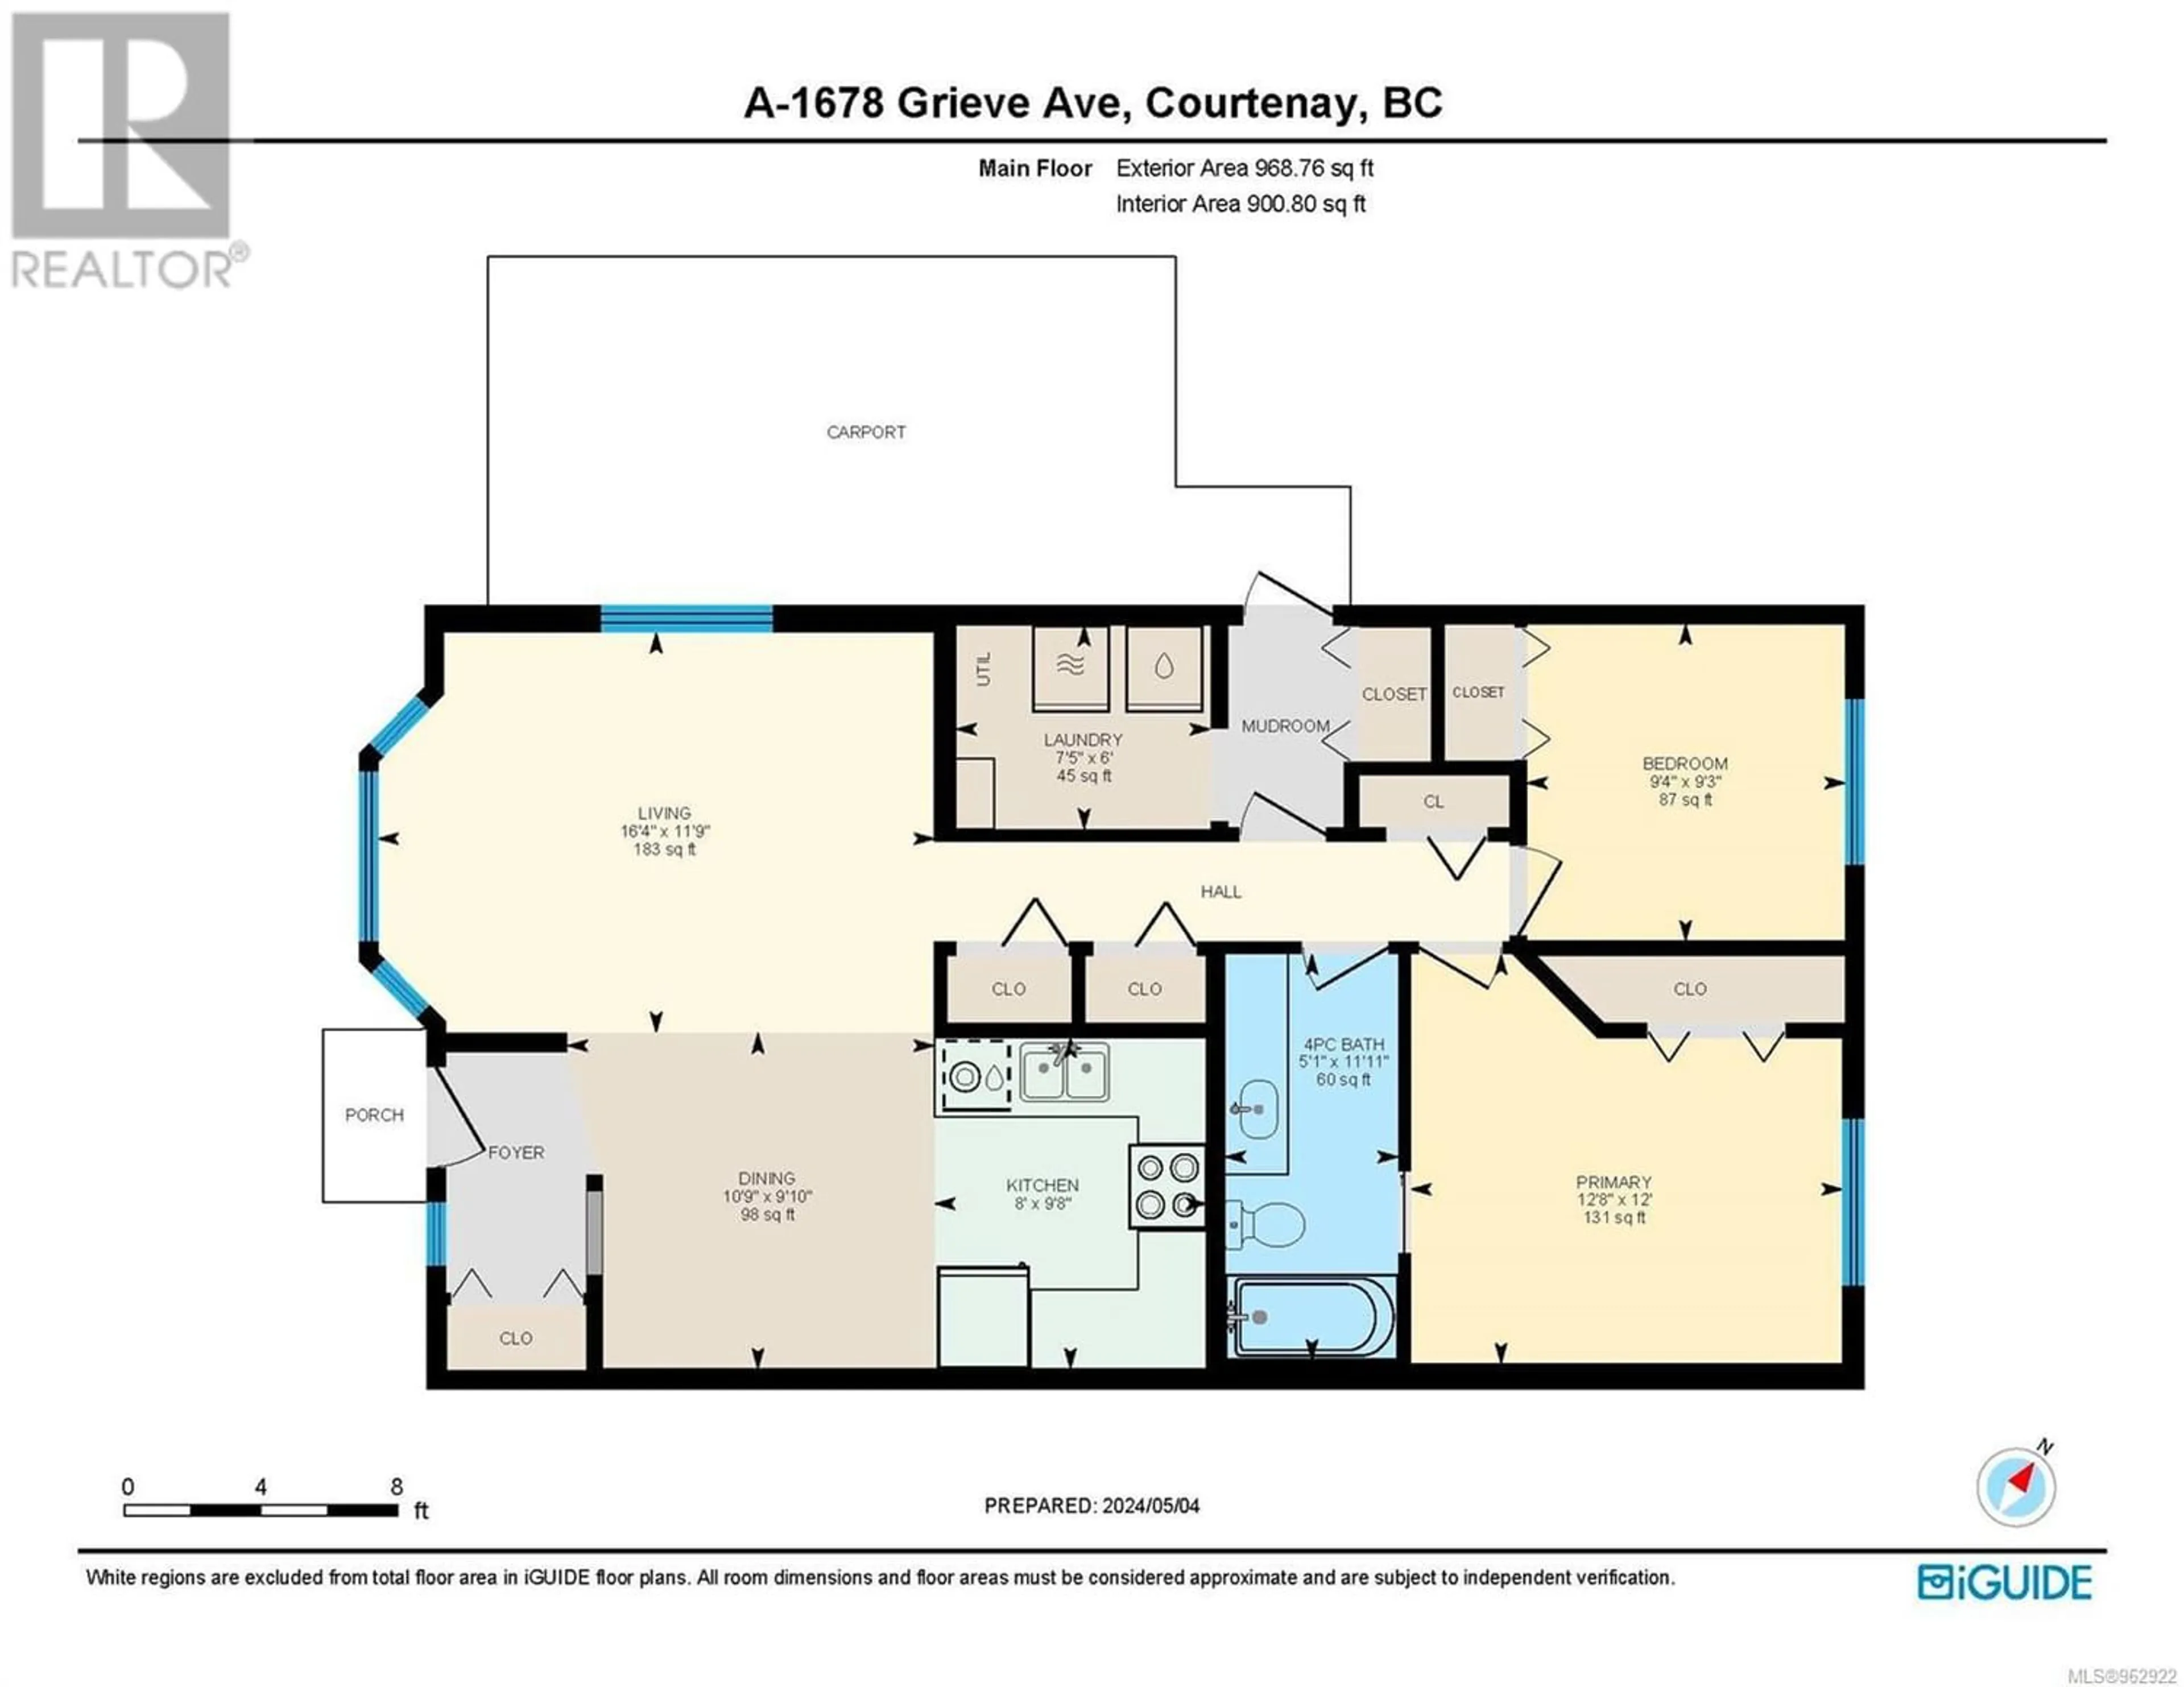 Floor plan for A 1678 Grieve Ave, Courtenay British Columbia V9N2W3